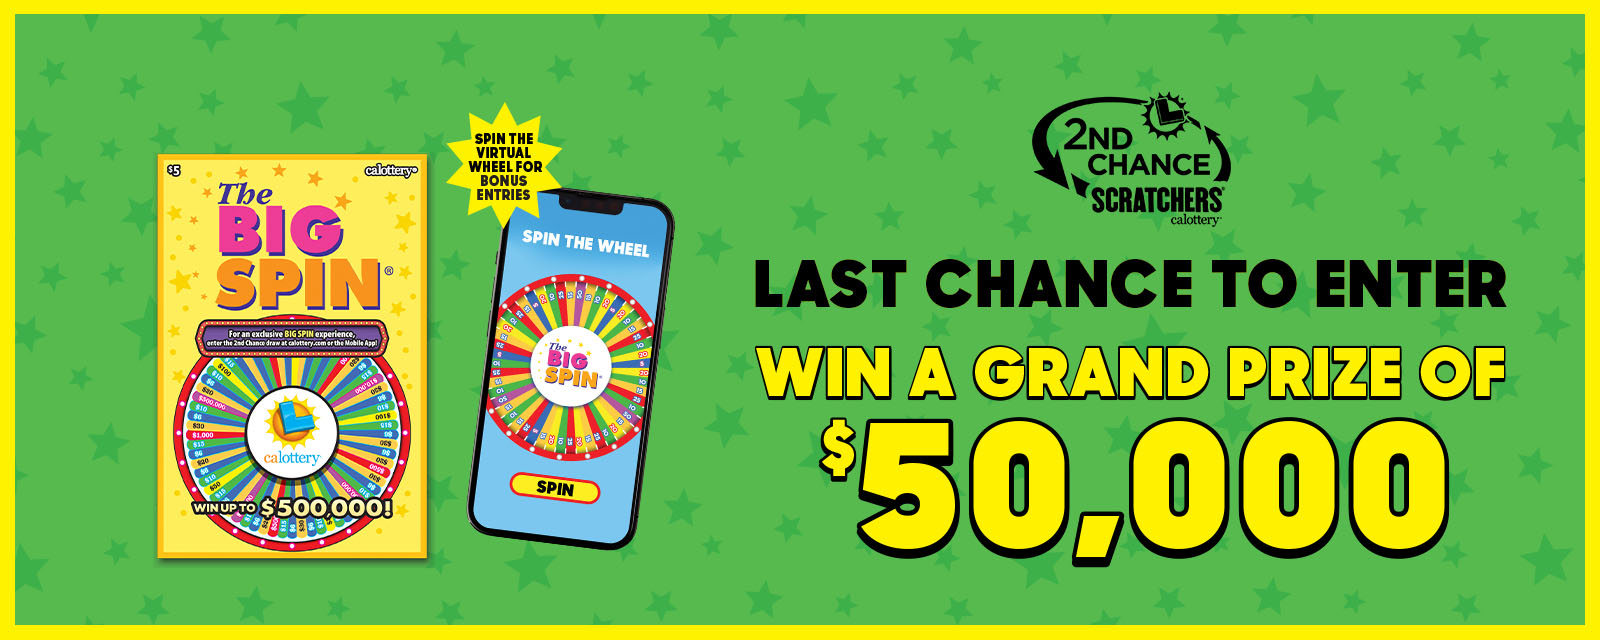 Last Chance To Enter, Win A Grand Prize of $50,000